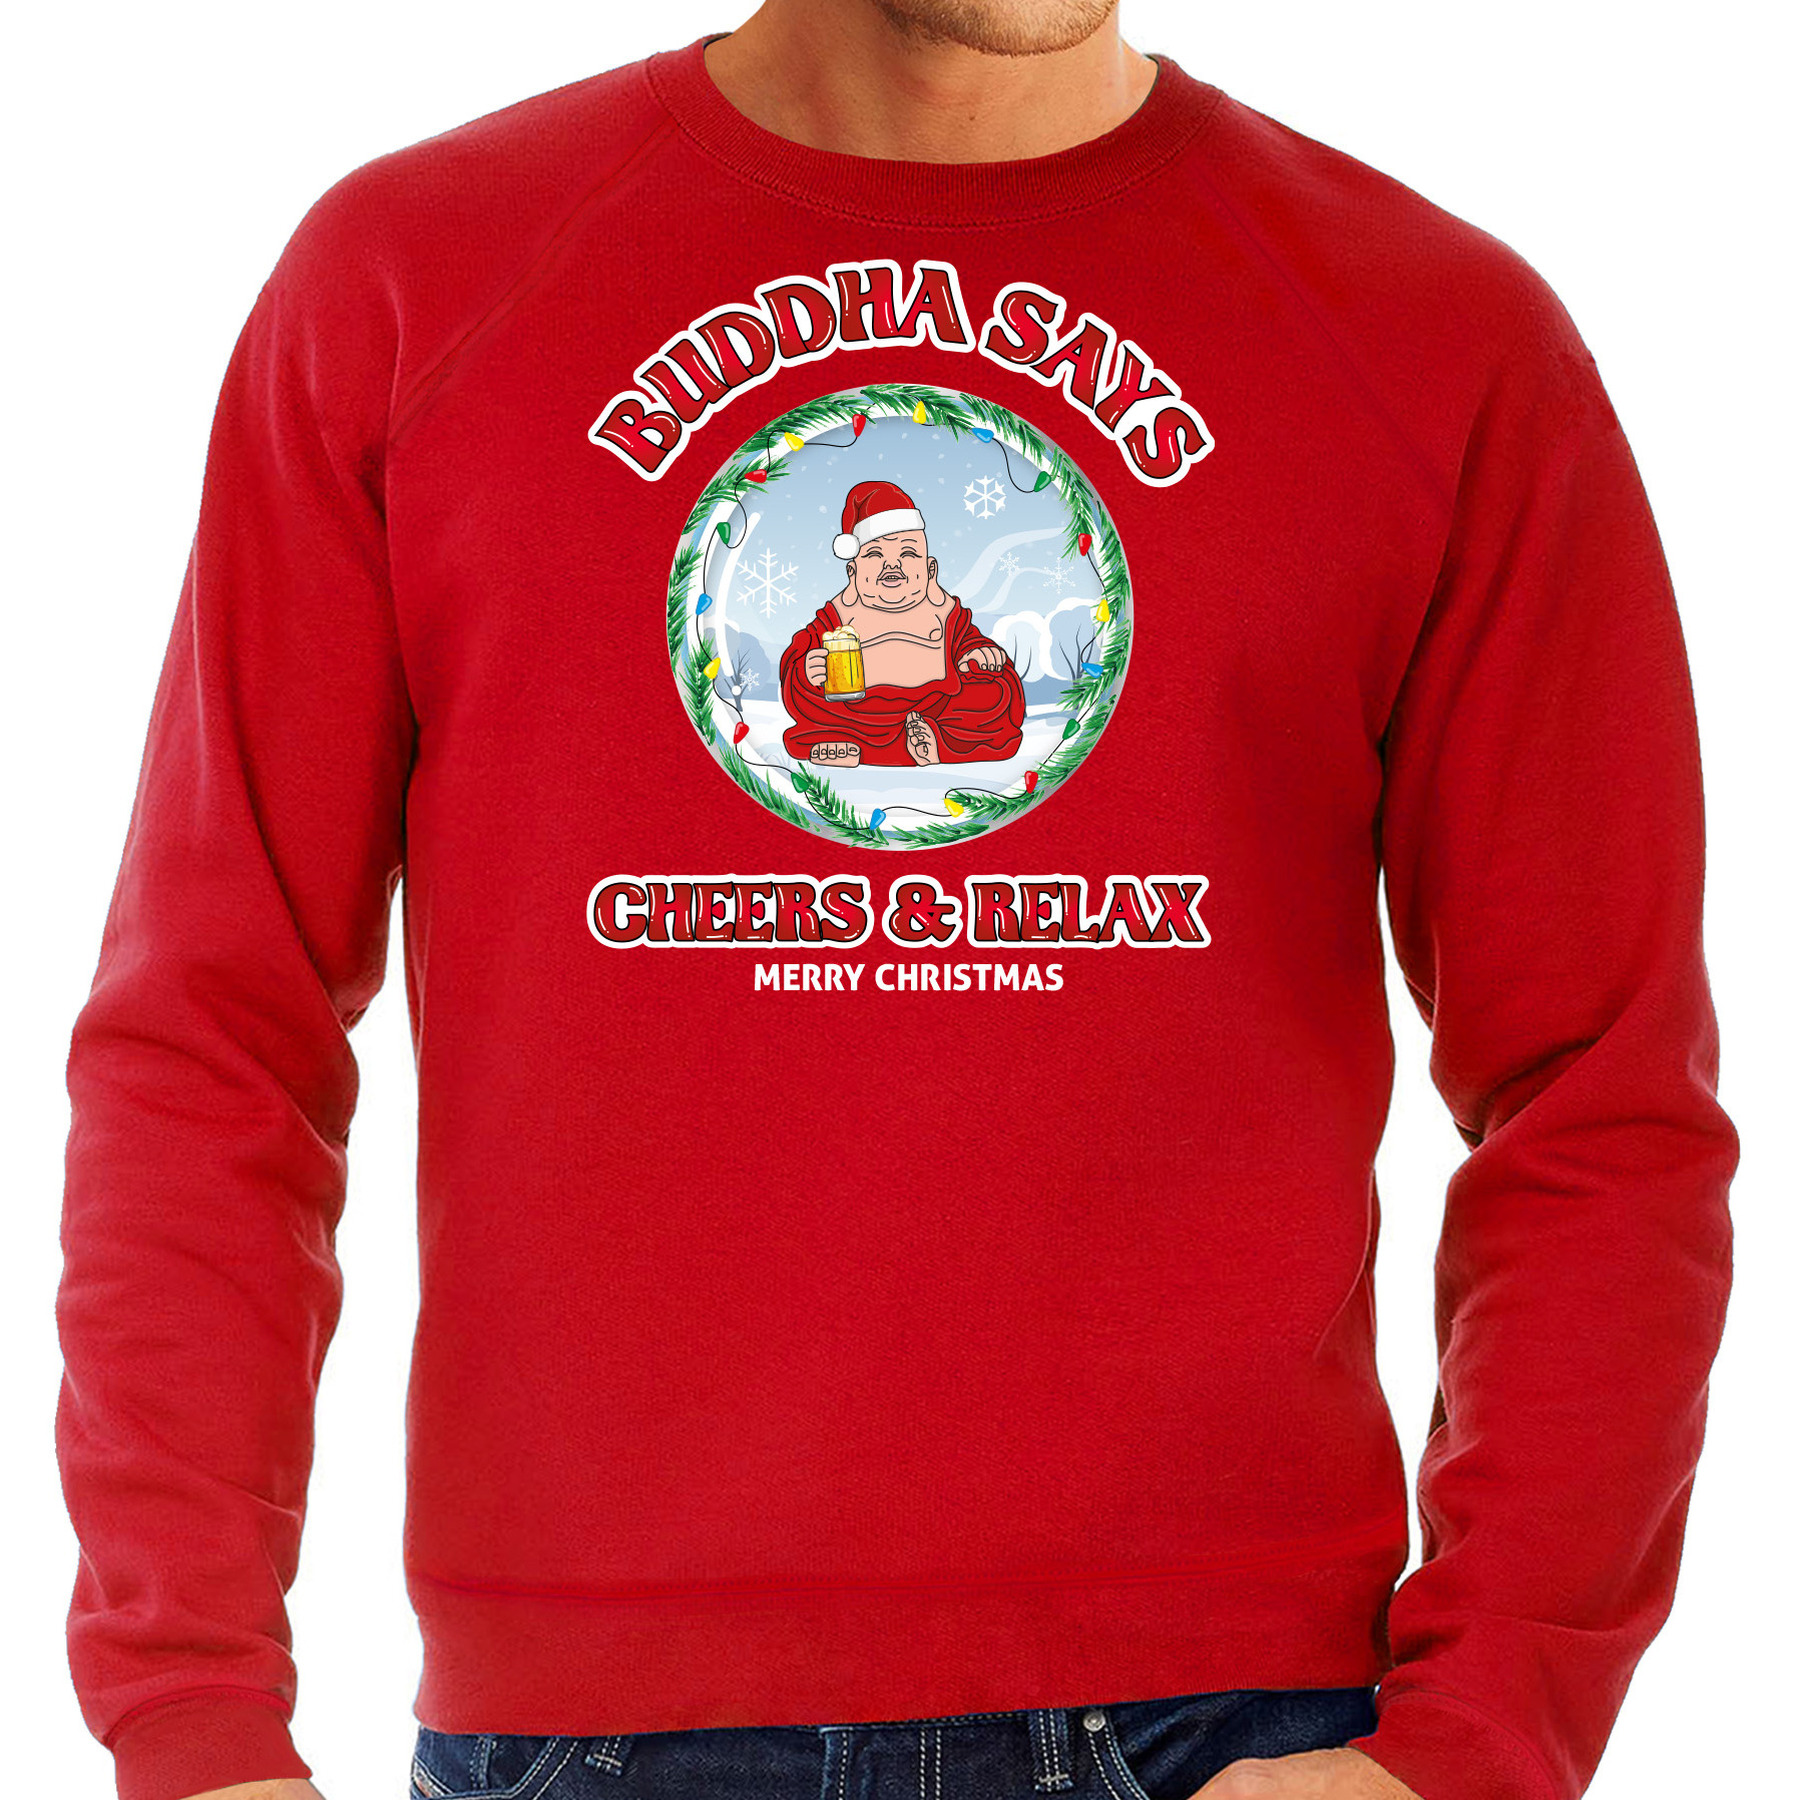 Bellatio Decorations foute Kersttrui-sweater heren buddha says cheers & relax rood bier